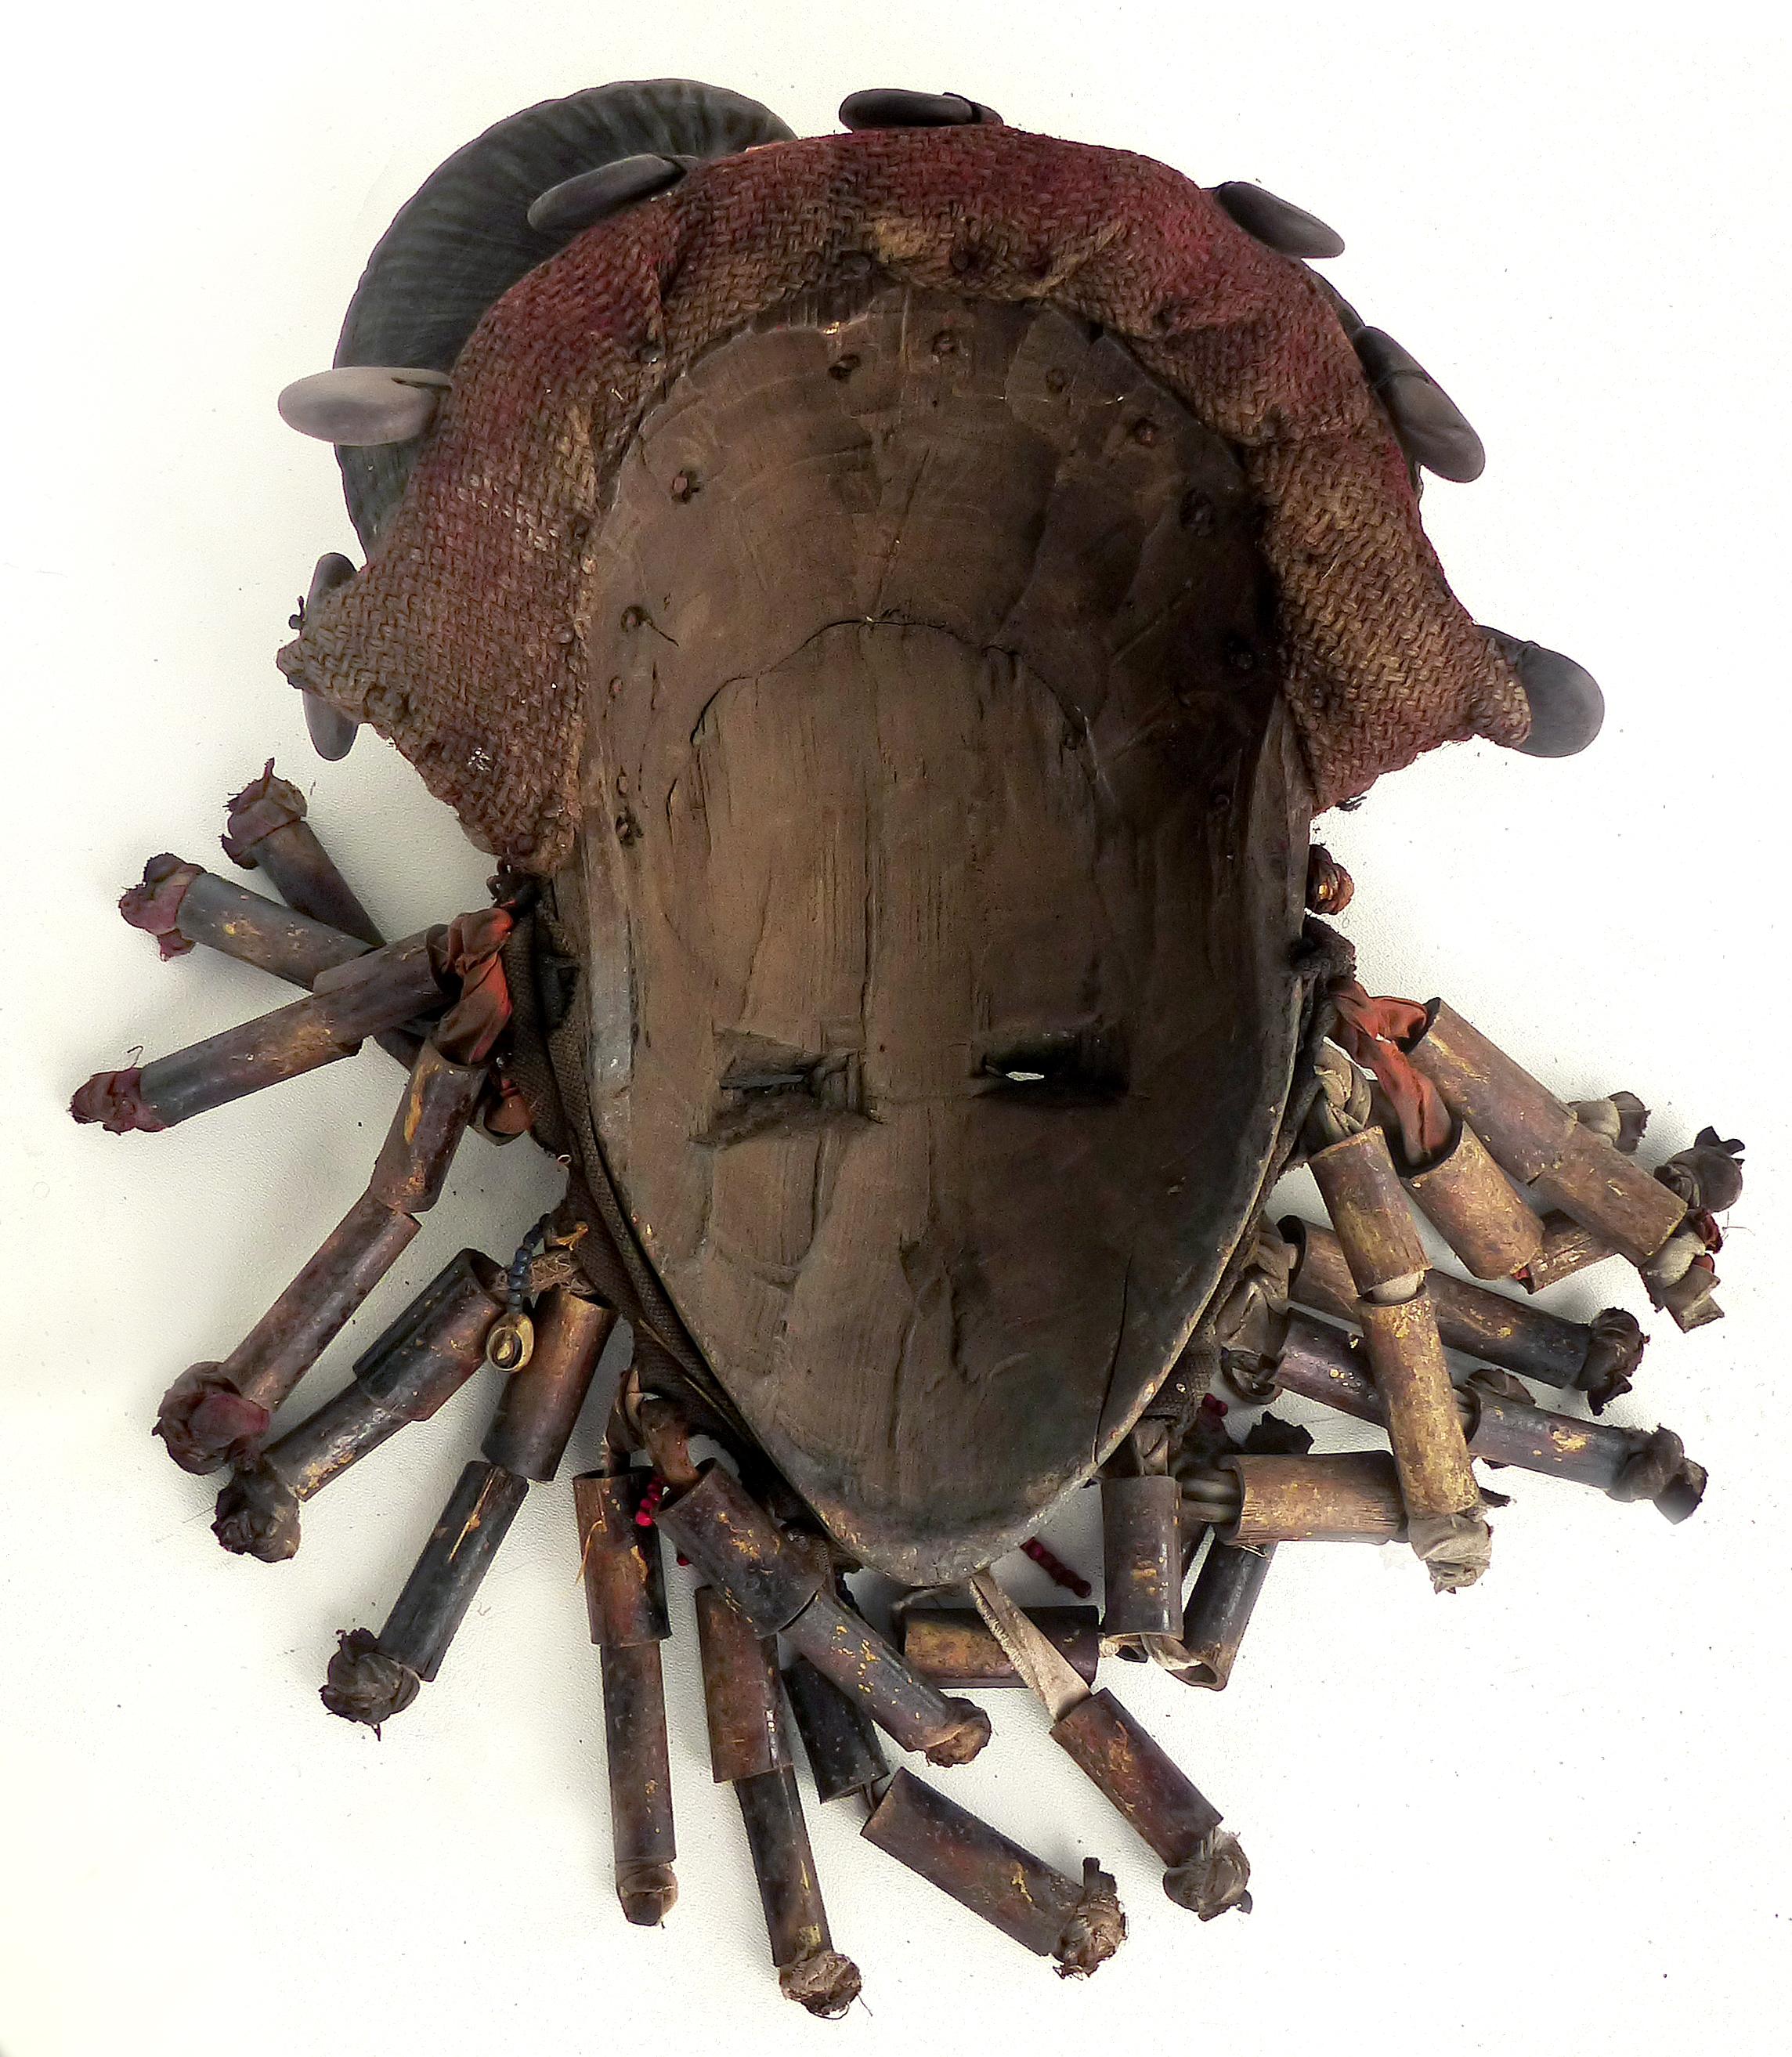 Cameroonian African Bamileke Tribal Mask from Cameroon with Horns